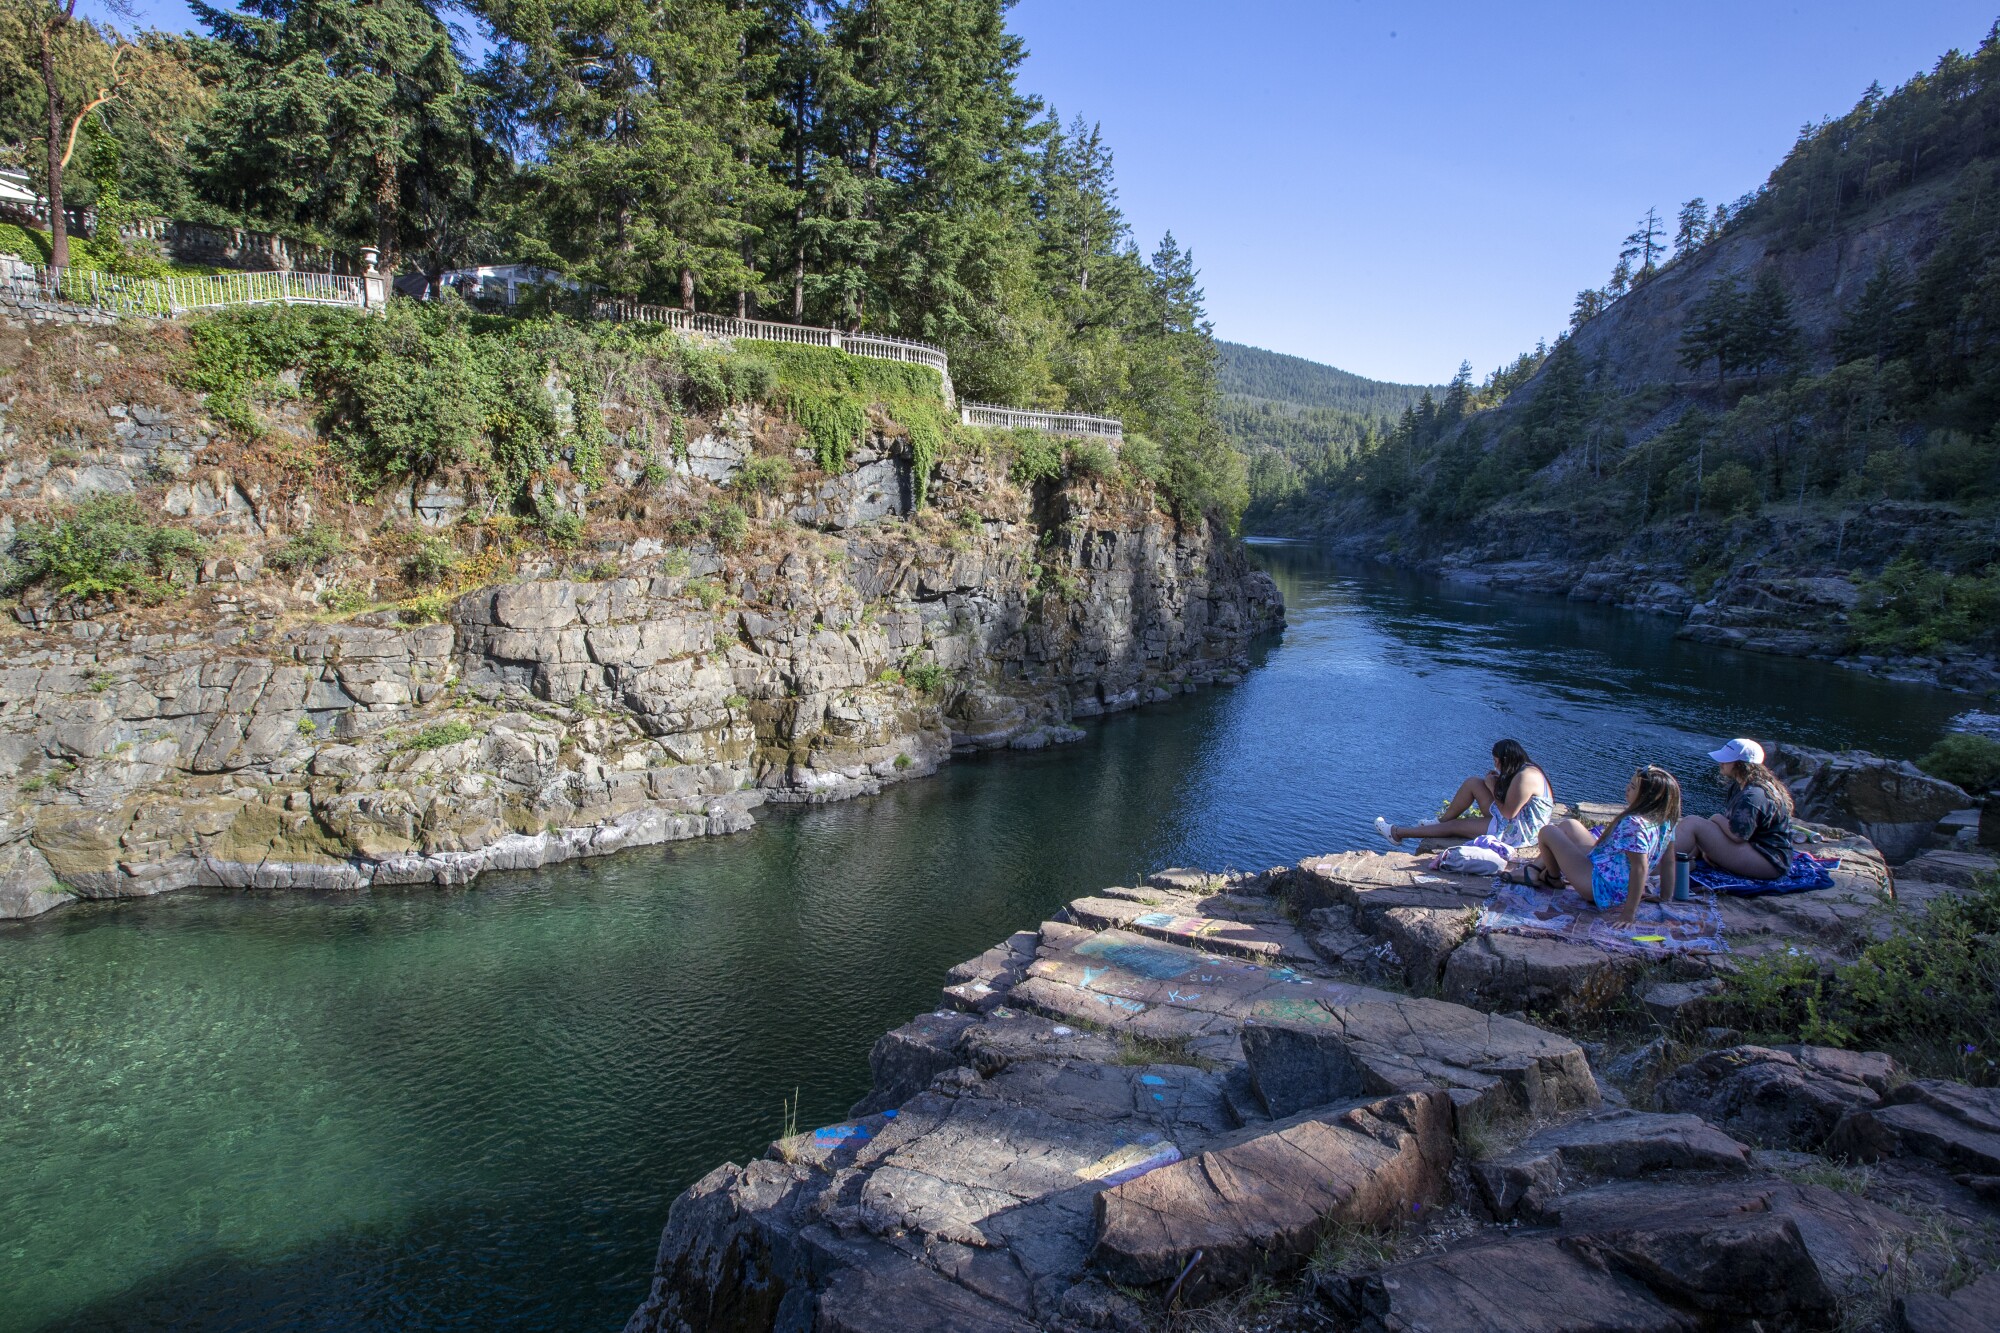 People relax on a bluff overlooking the Smith River